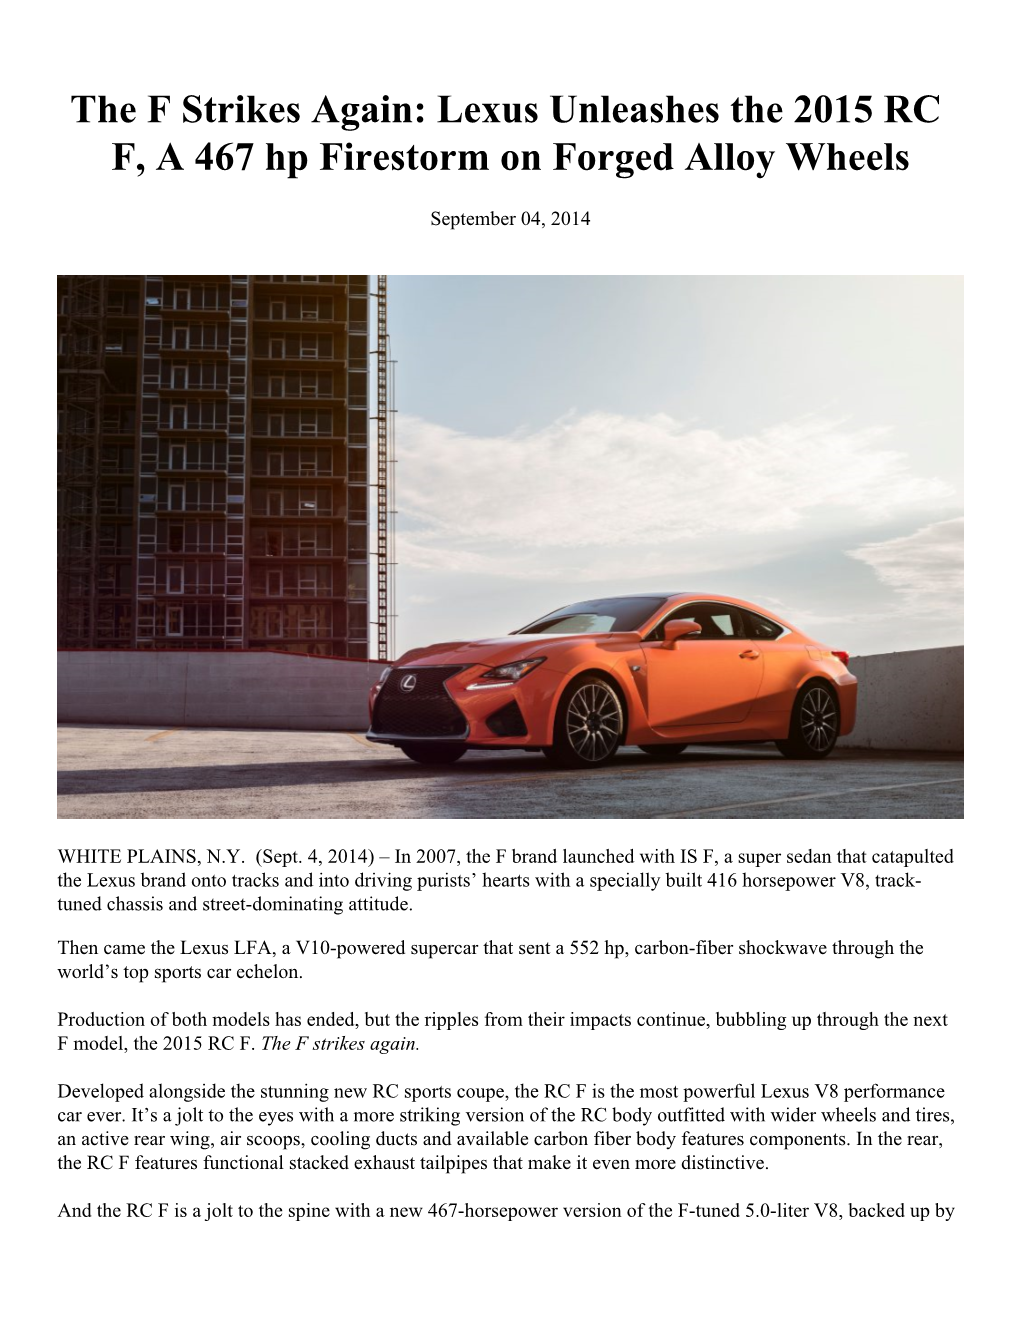 Lexus Unleashes the 2015 RC F, a 467 Hp Firestorm on Forged Alloy Wheels